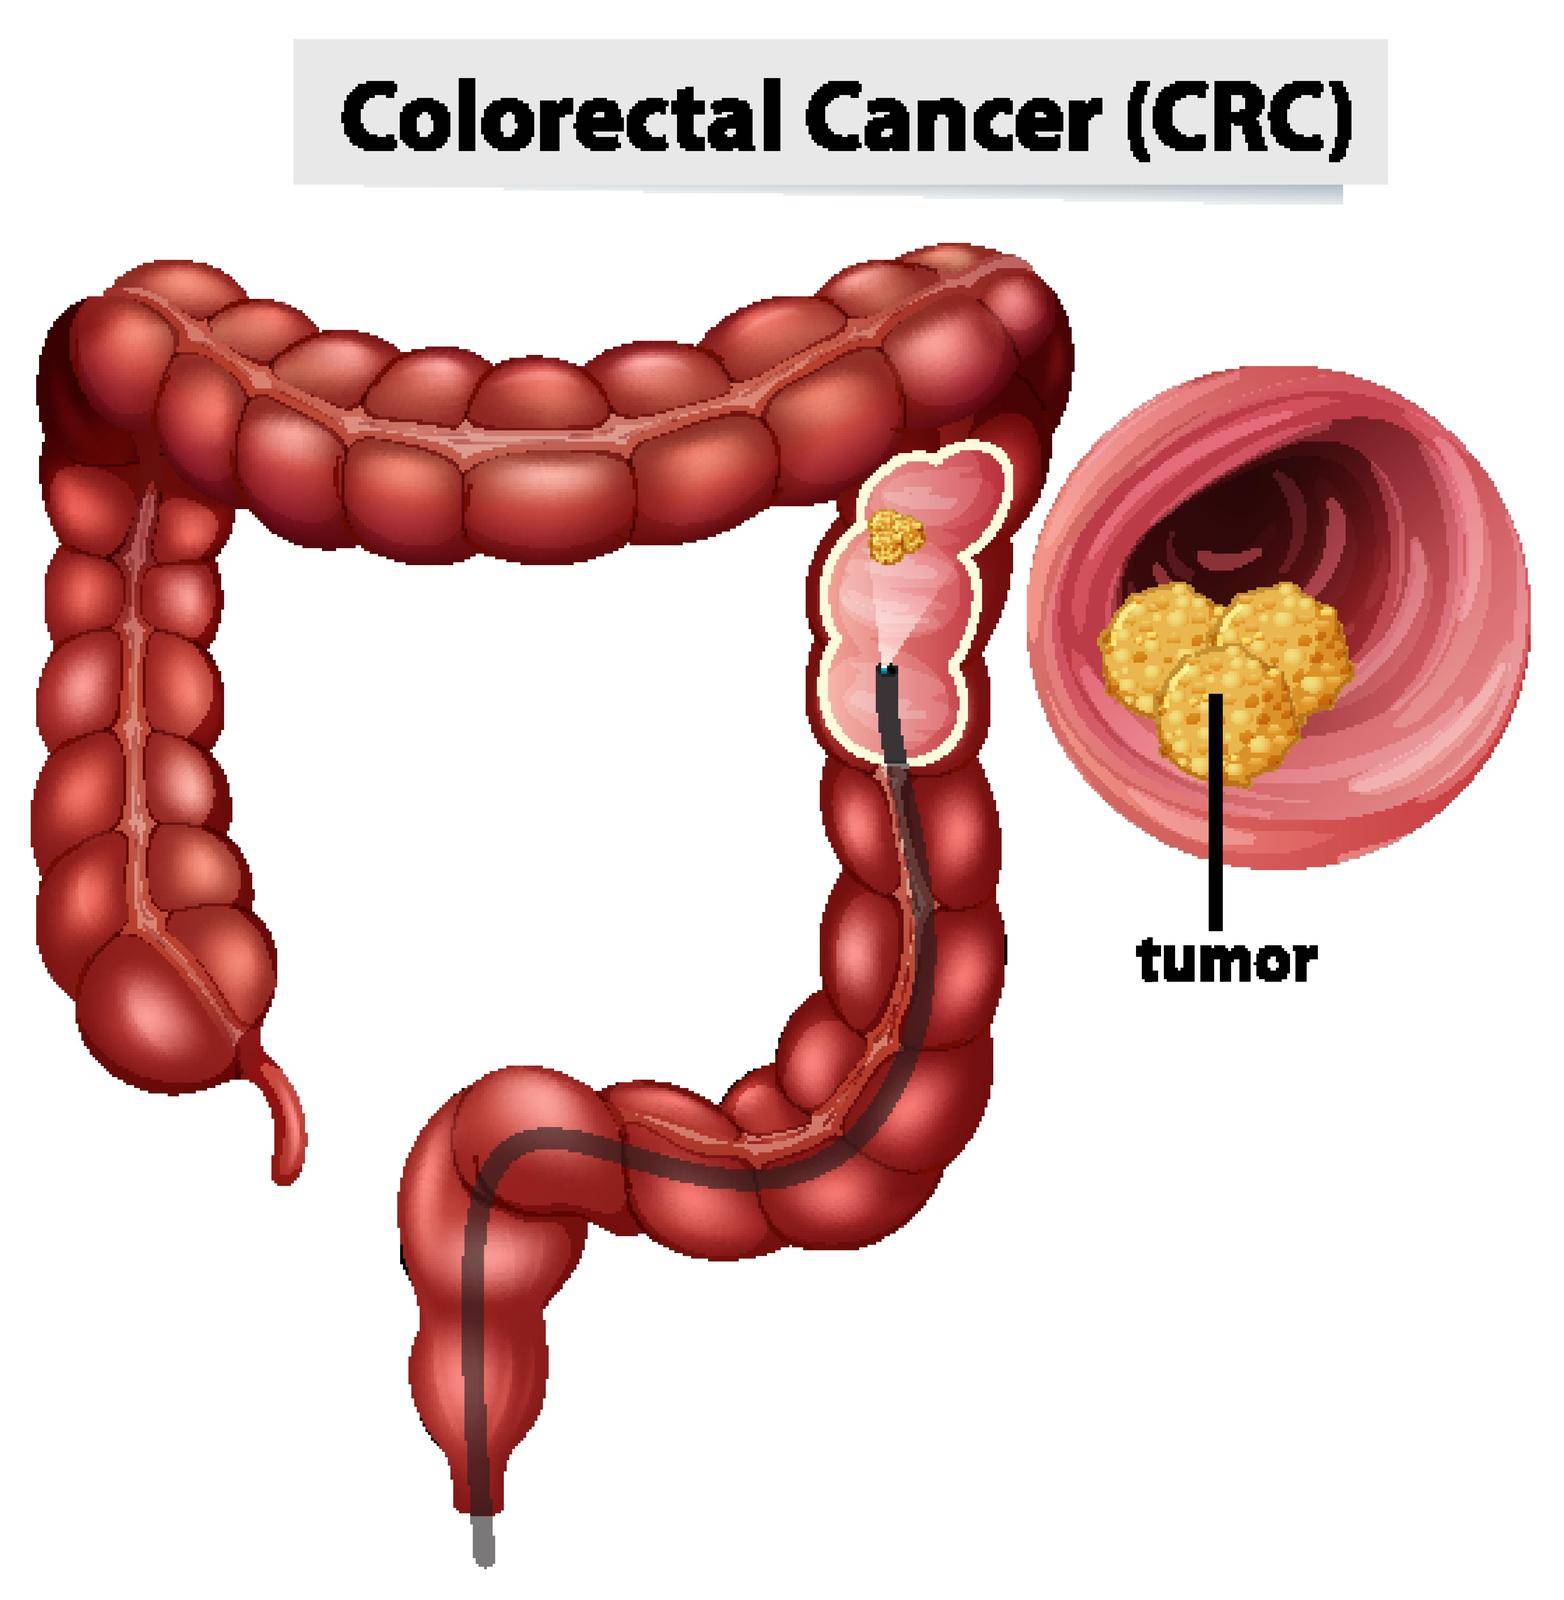 Colorectal Cancer (CRC) infographic for education illustration